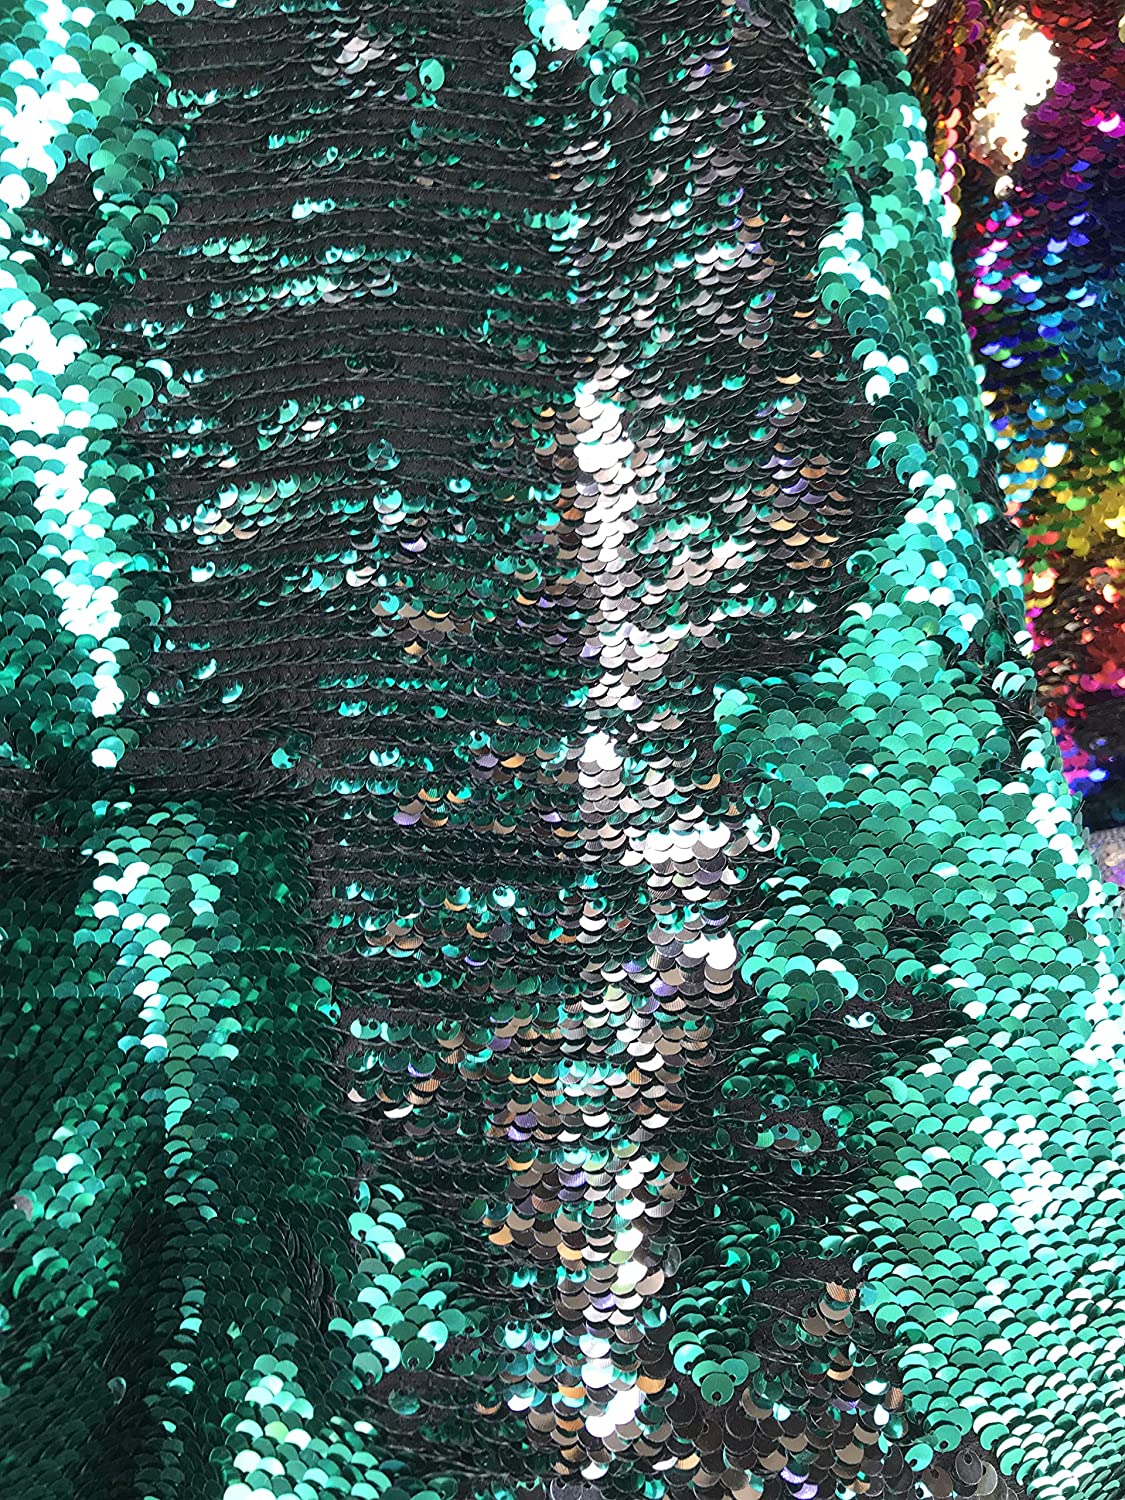 54" Wide Mermaid Flip Up Sequin Reversible Sparkly Fabric for Dress Clothing Making, Home Decor (Emerald Green & Silver, by The Yard)